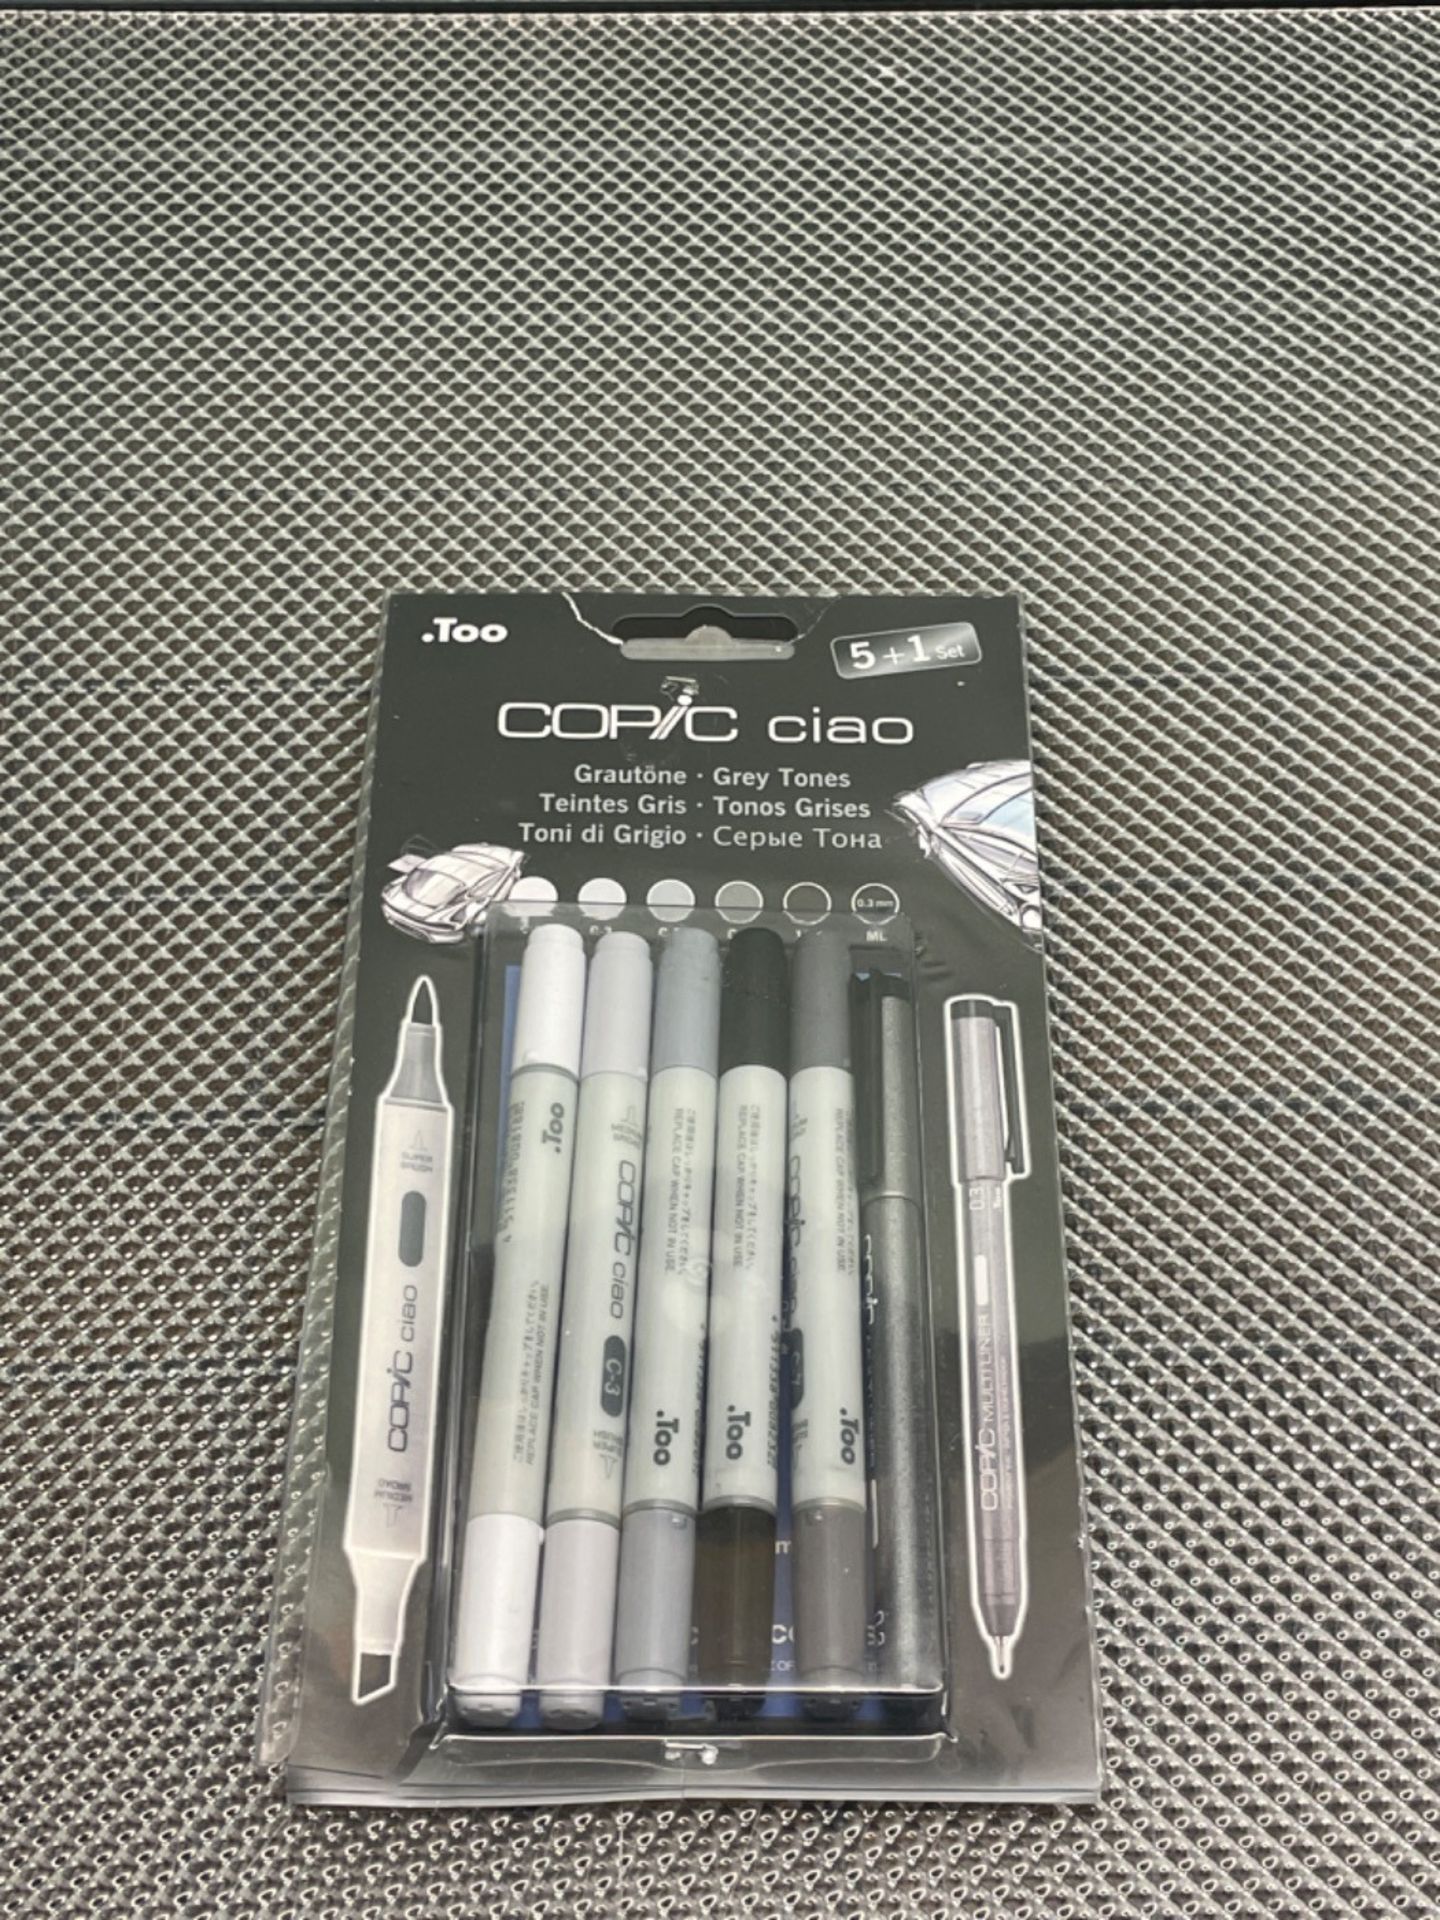 Copic Ciao Set includes Marker - Grey Tones (5+1) - Image 2 of 2